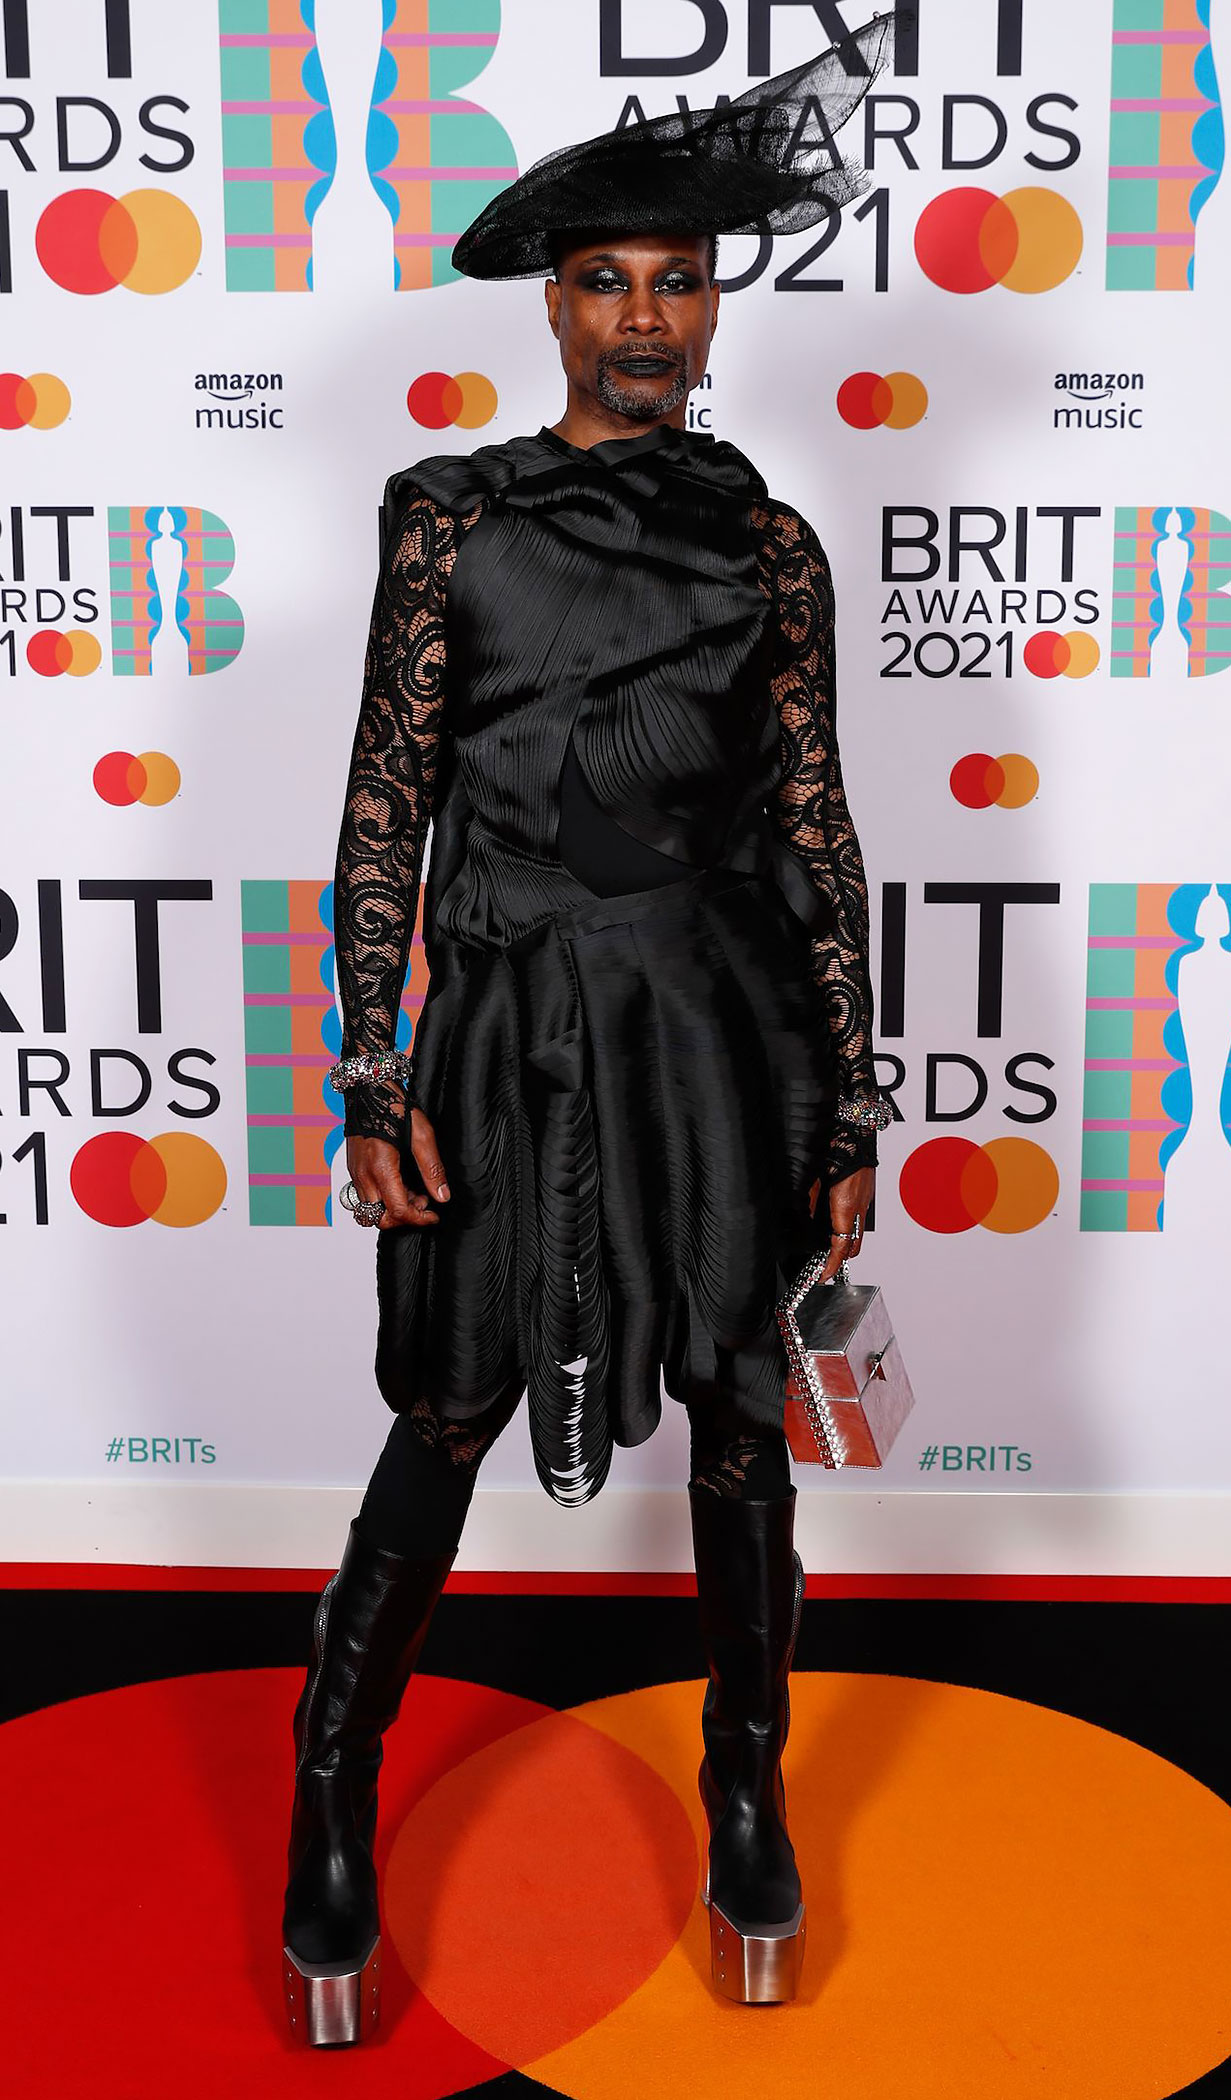 Billy Porter Looked Unreal in Lace Dress, Platform Boots at BRIT Awards